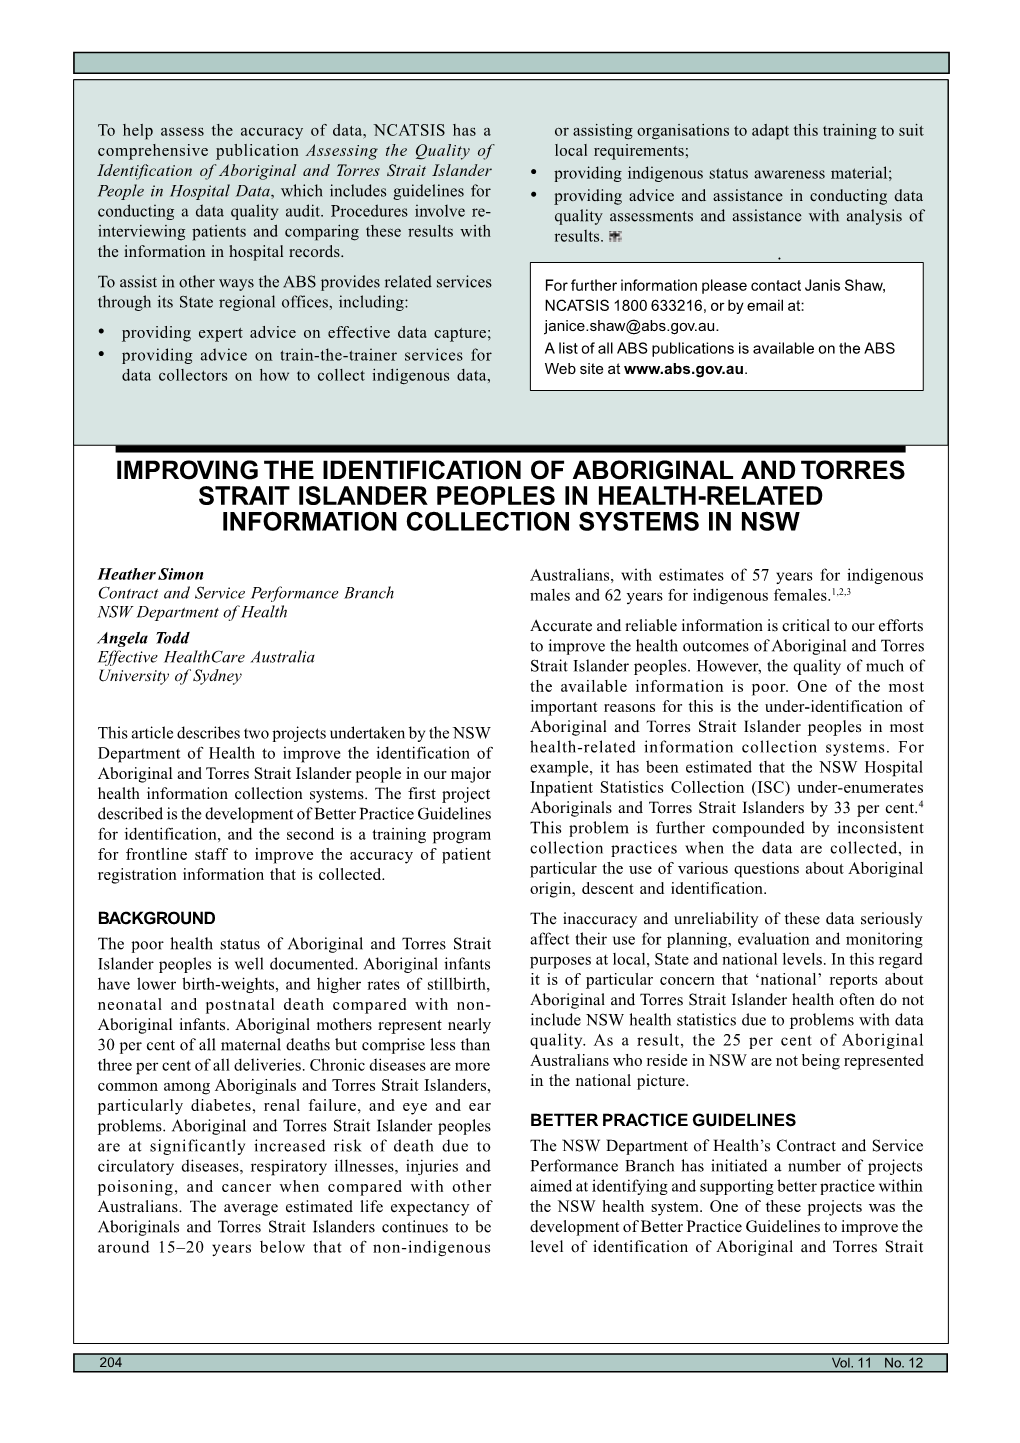 Improving the Identification of Aboriginal and Torres Strait Islander Peoples in Health-Related Information Collection Systems in Nsw